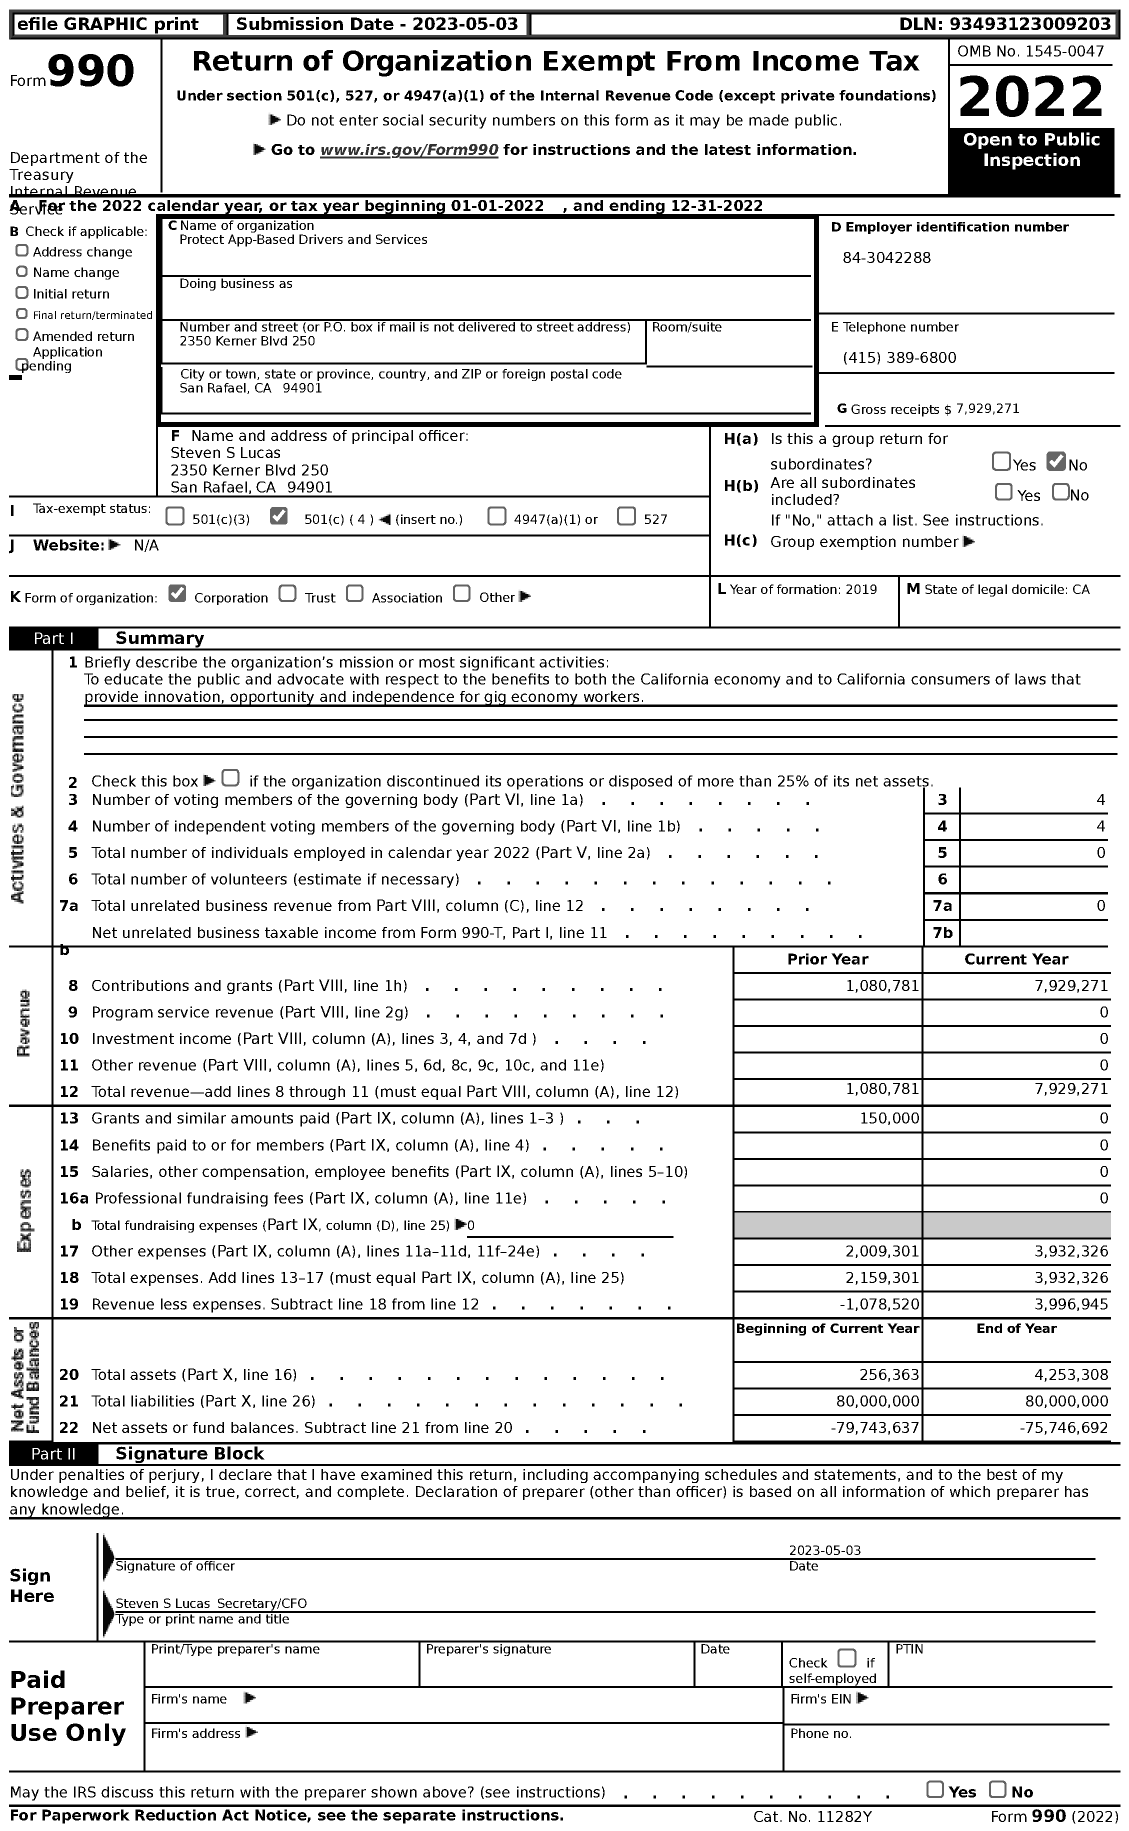 Image of first page of 2022 Form 990 for Protect App-Based Drivers and Services